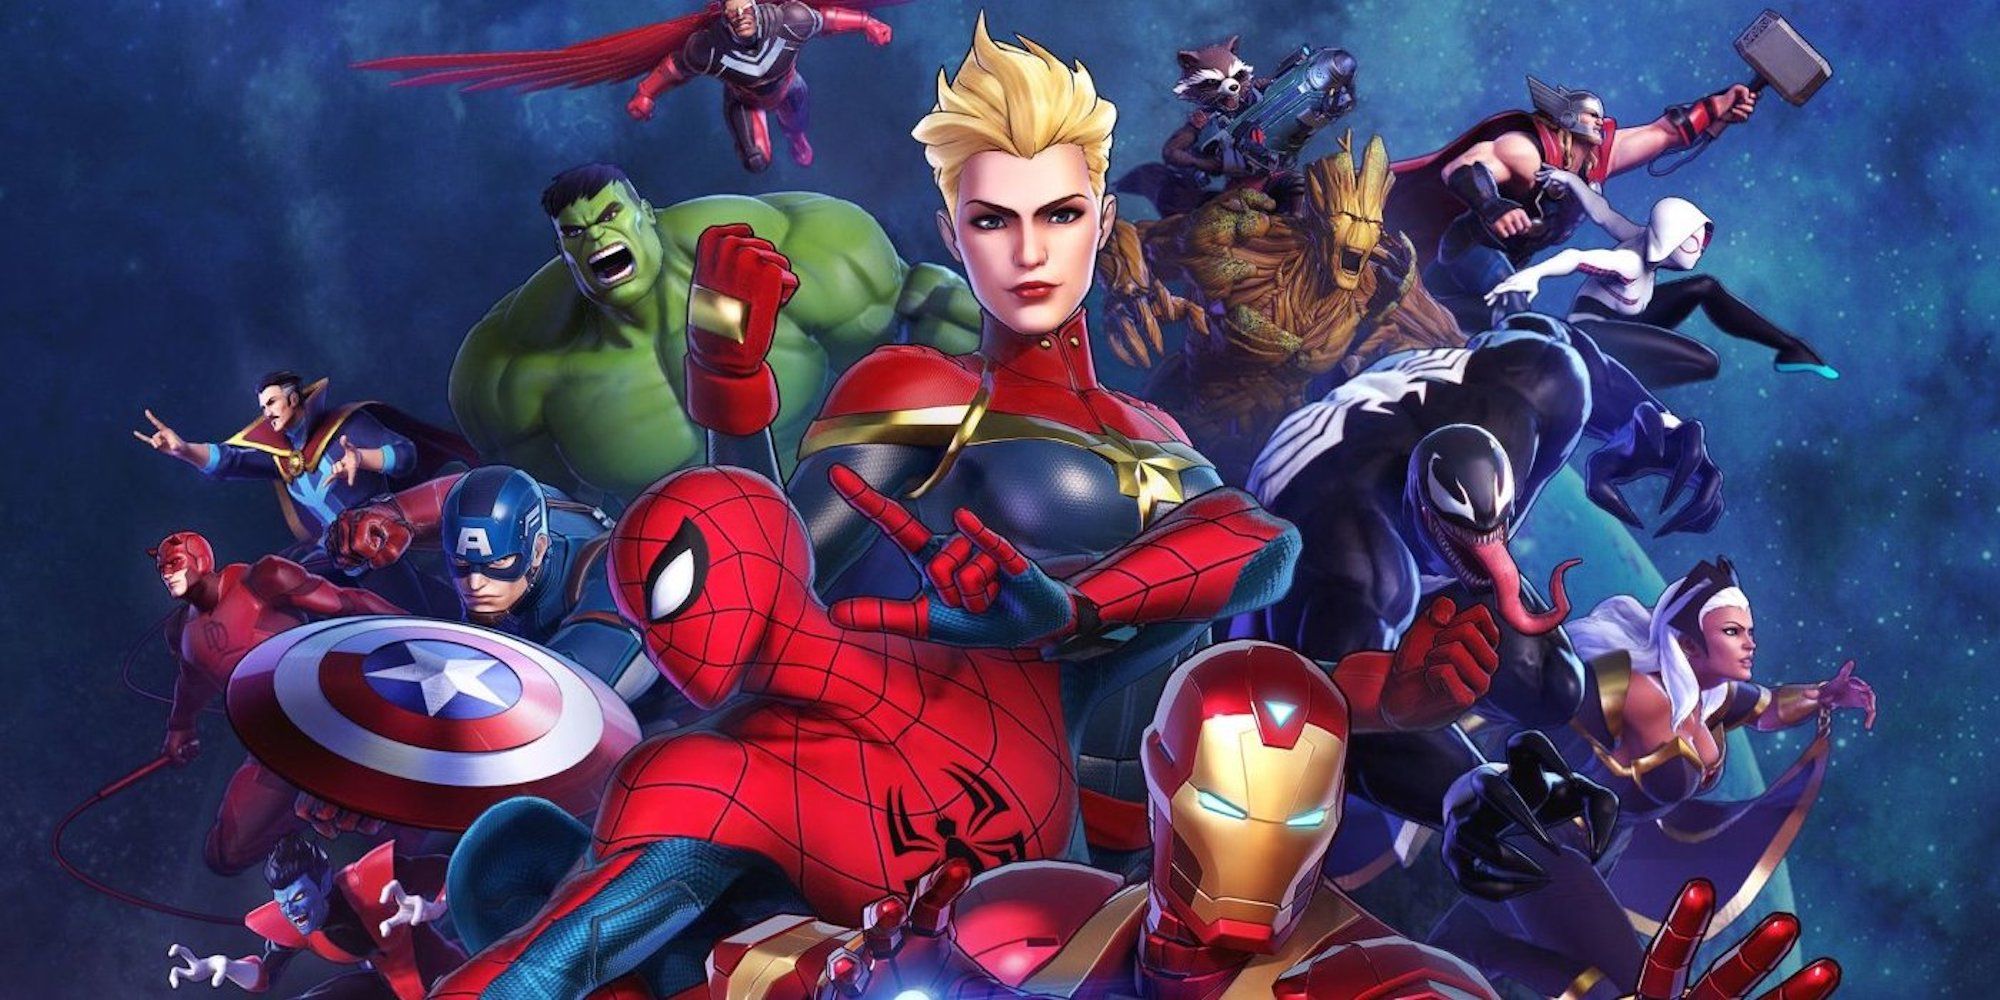 Promo art featuring characters in Marvel Ultimate Alliance 3